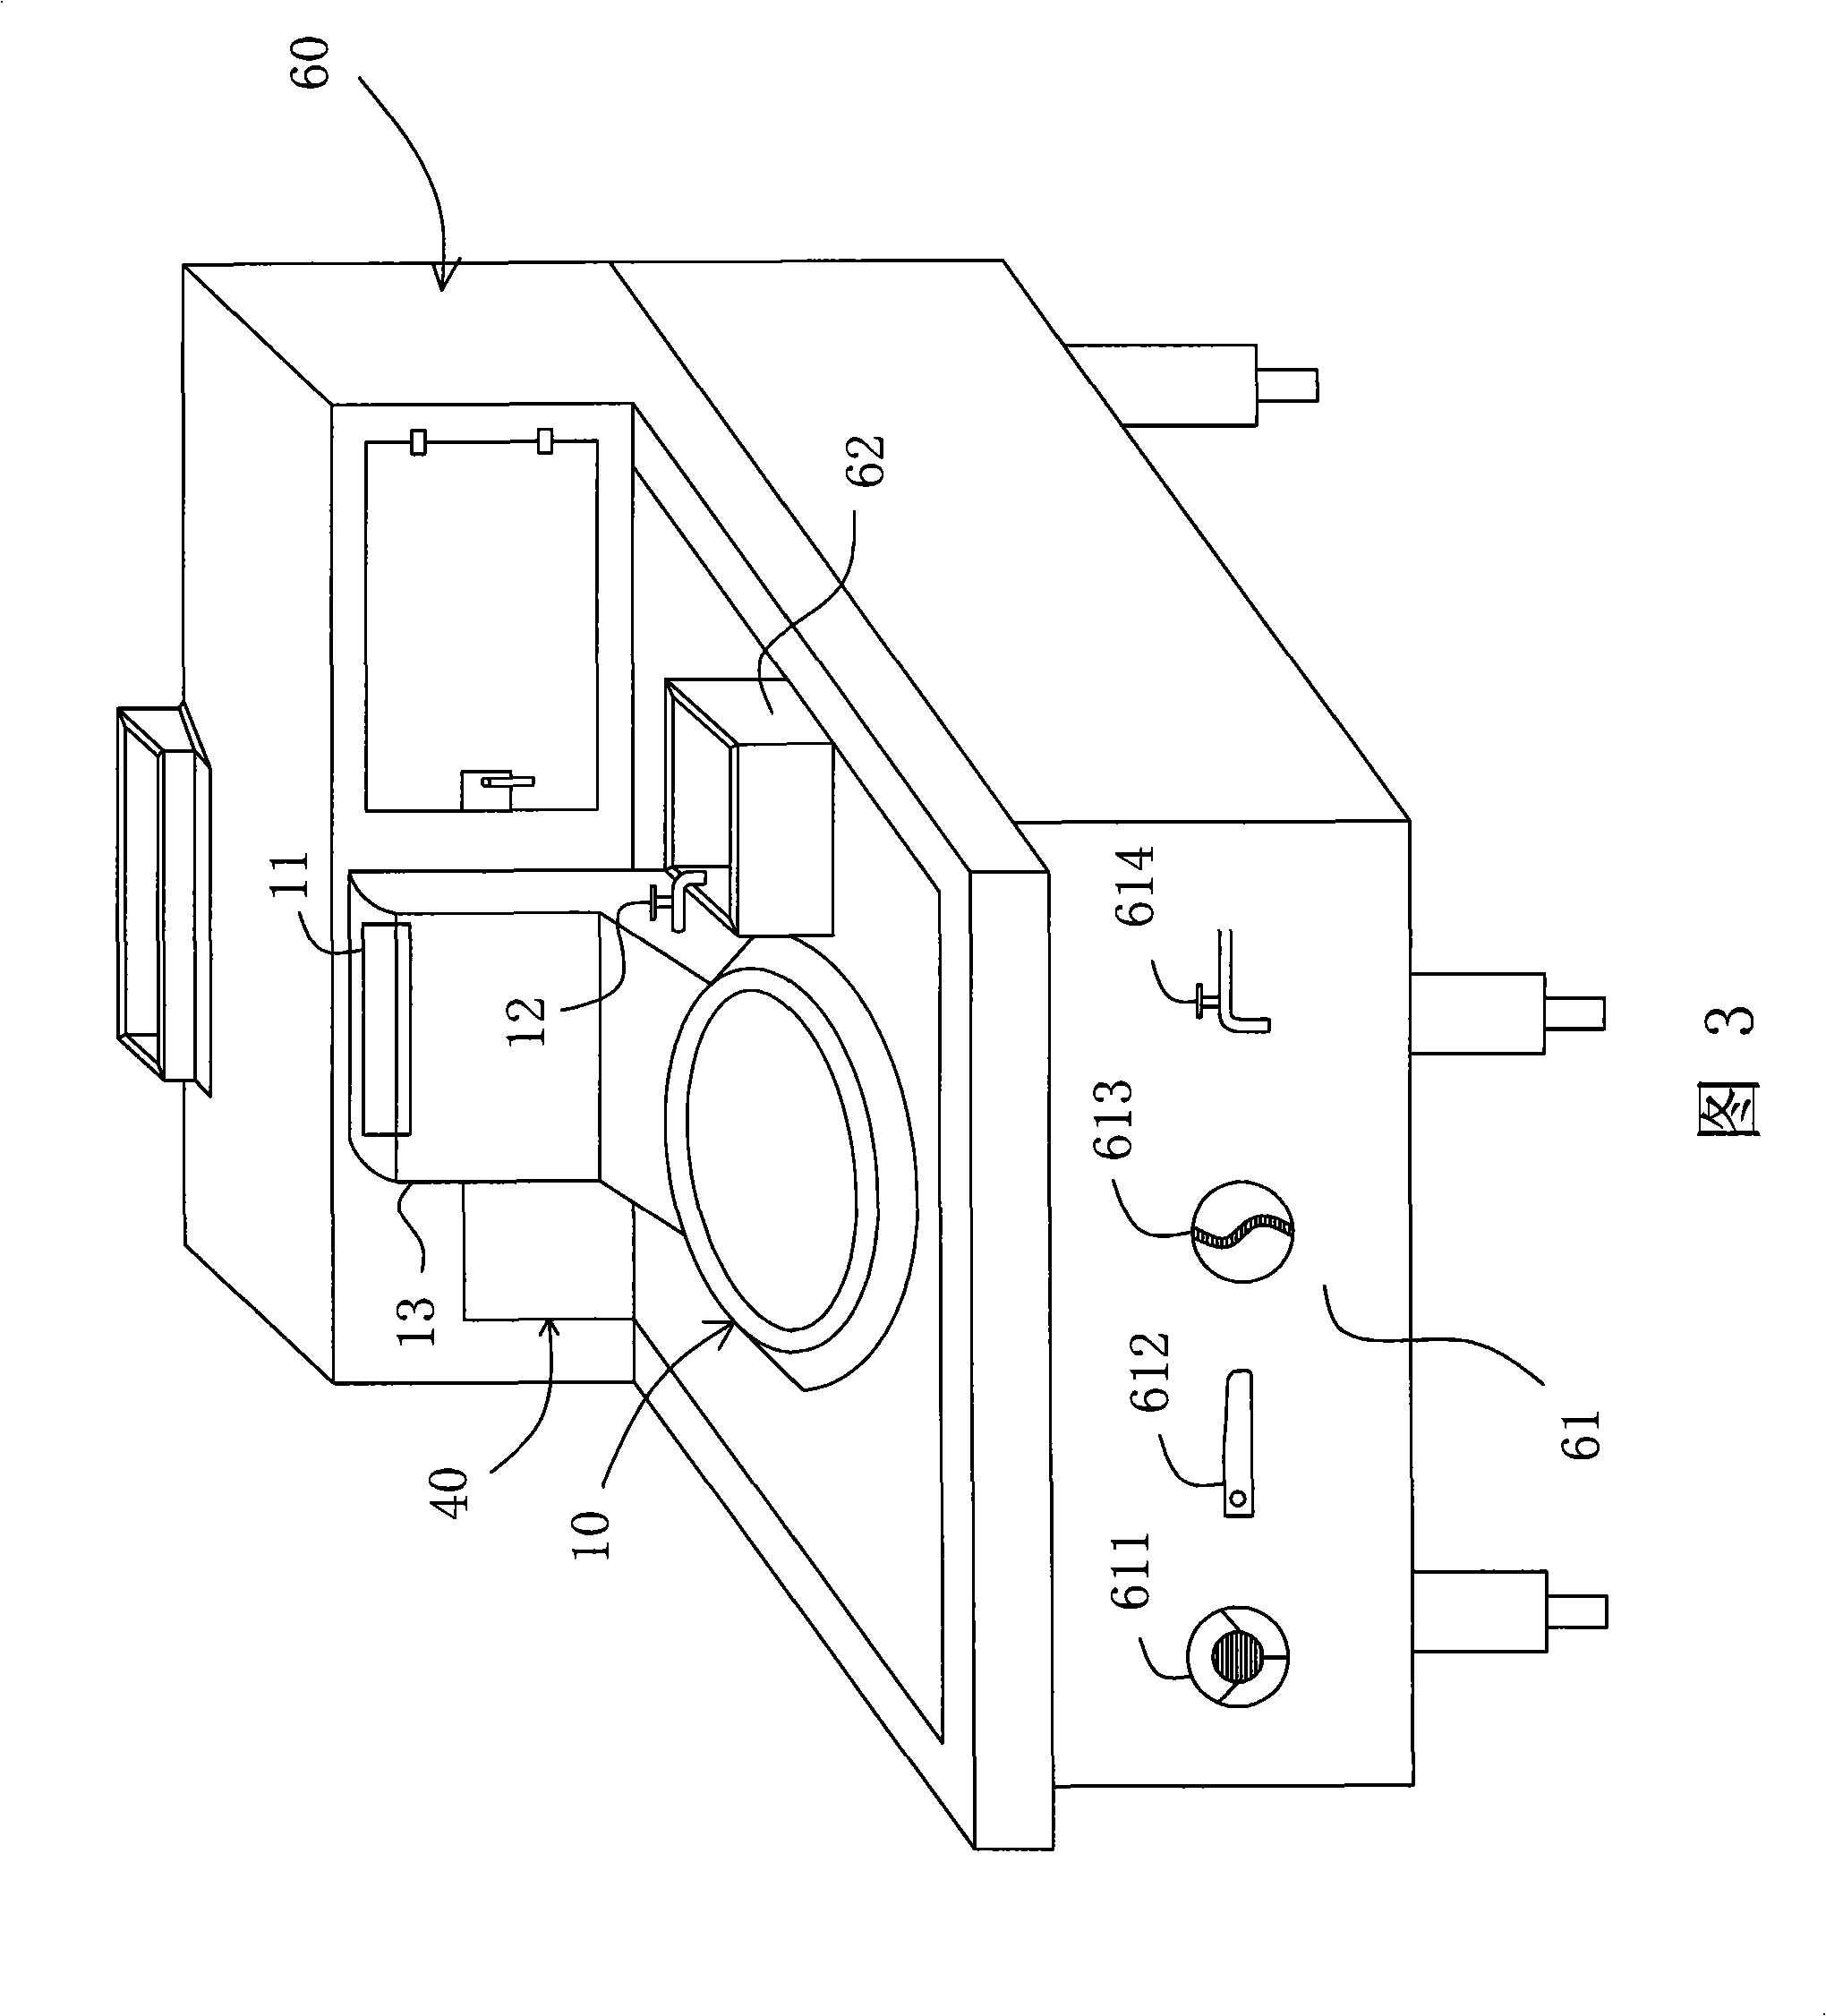 Energy-saving steaming and frying apparatus